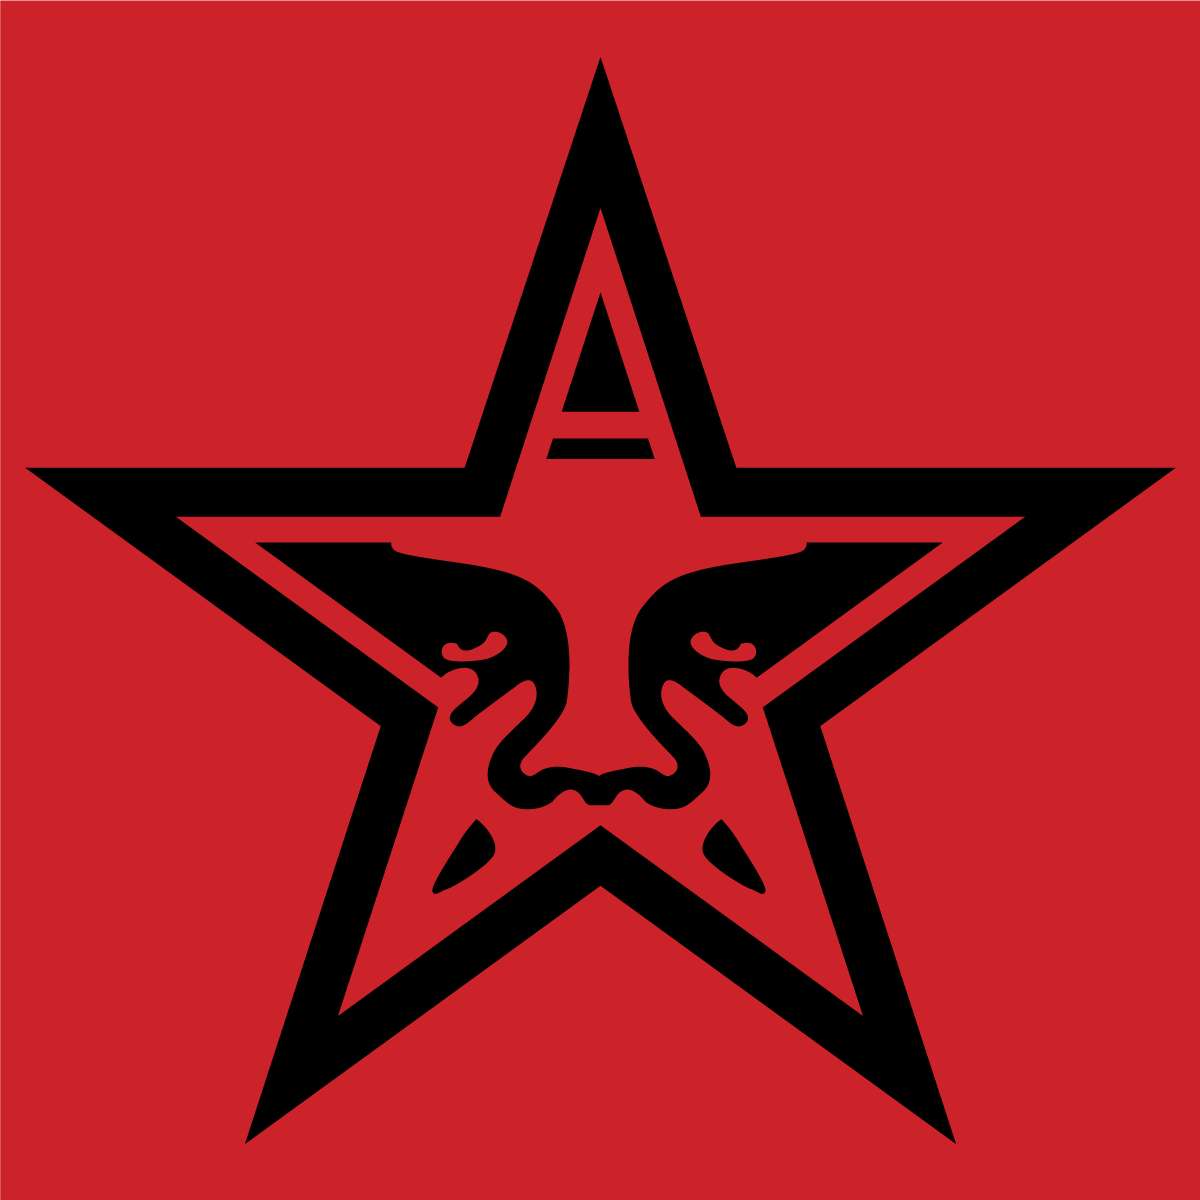 obey star logo meaning